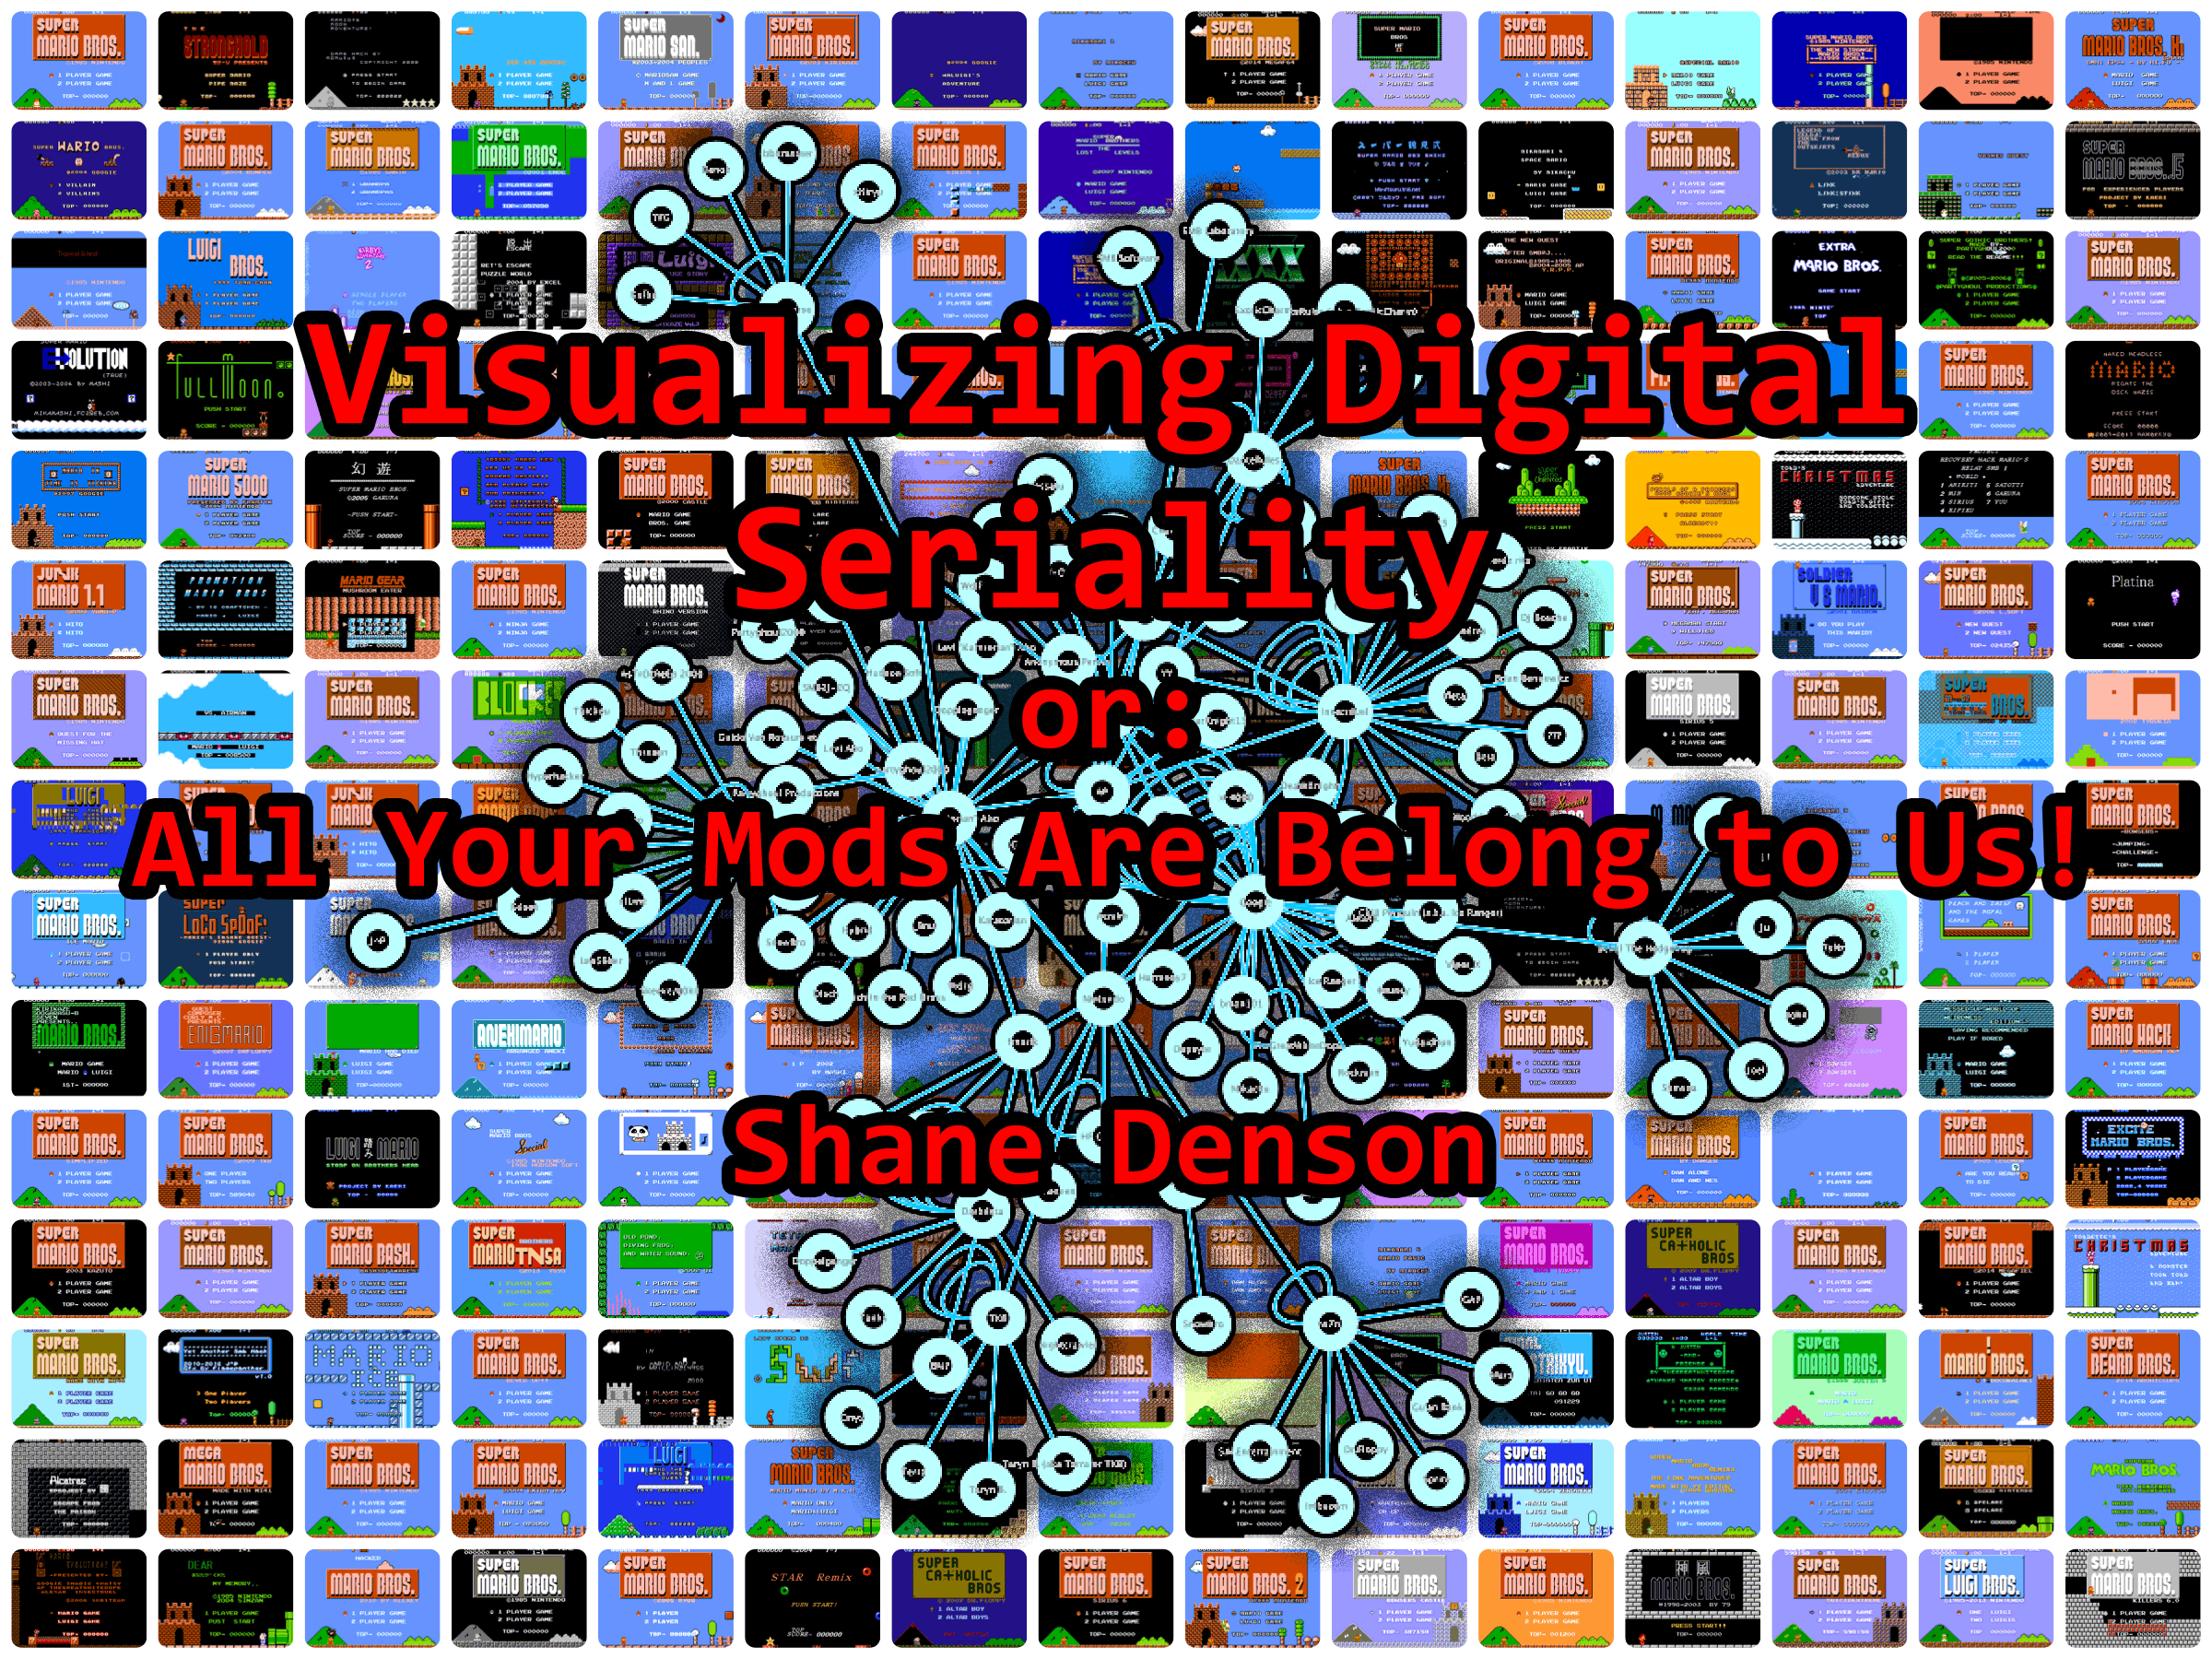 Title: Visualizing Digital Seriality, or: All Your Mods Are Belong to Us!